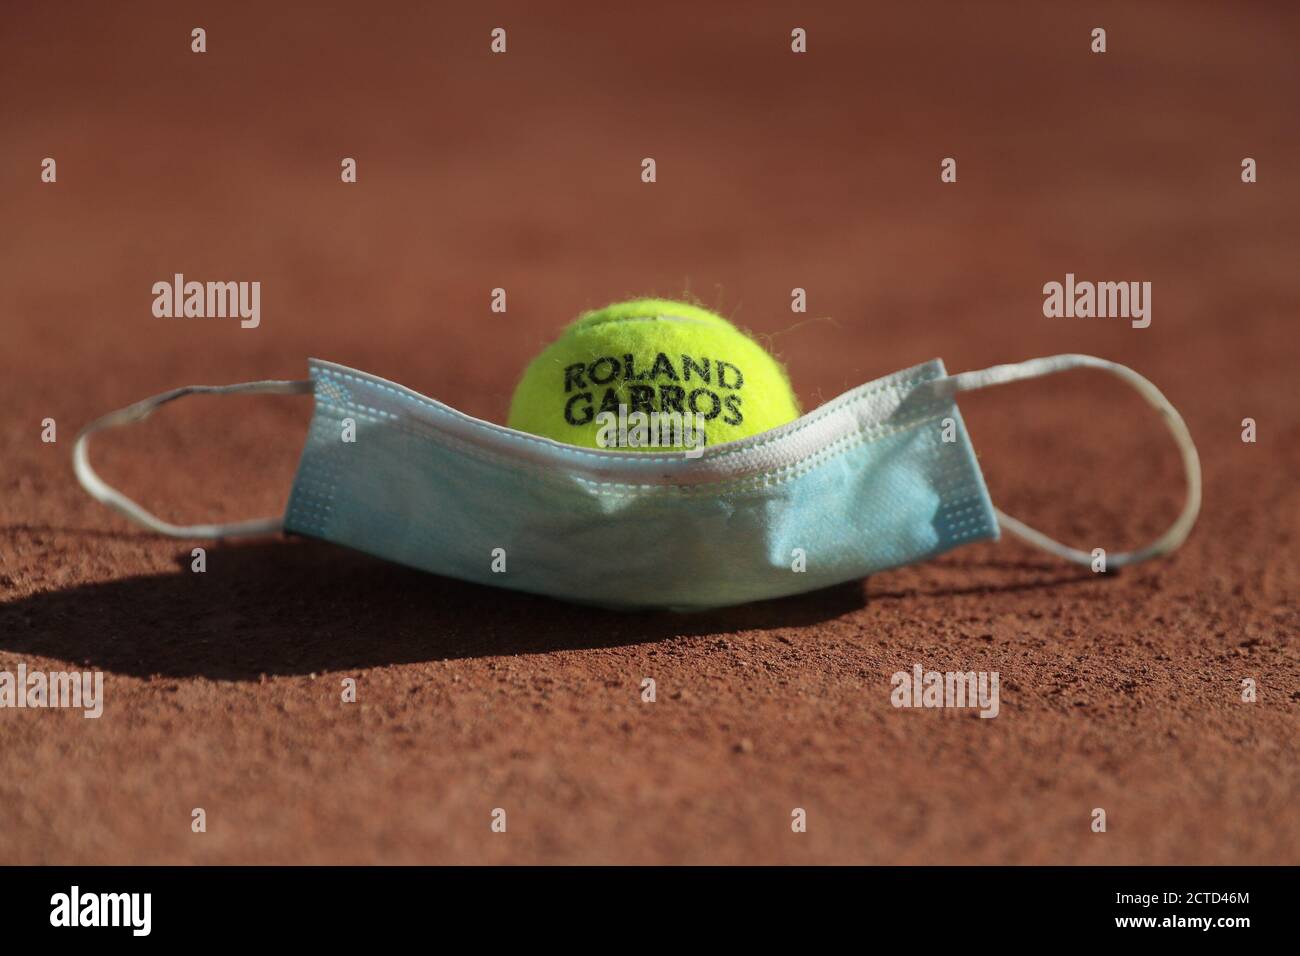 Illustration of official tennis ball Roland Garros 2020 by Wilson over protector mask on clay of Philippe Chatrier court under the CoVid health crisis Stock Photo